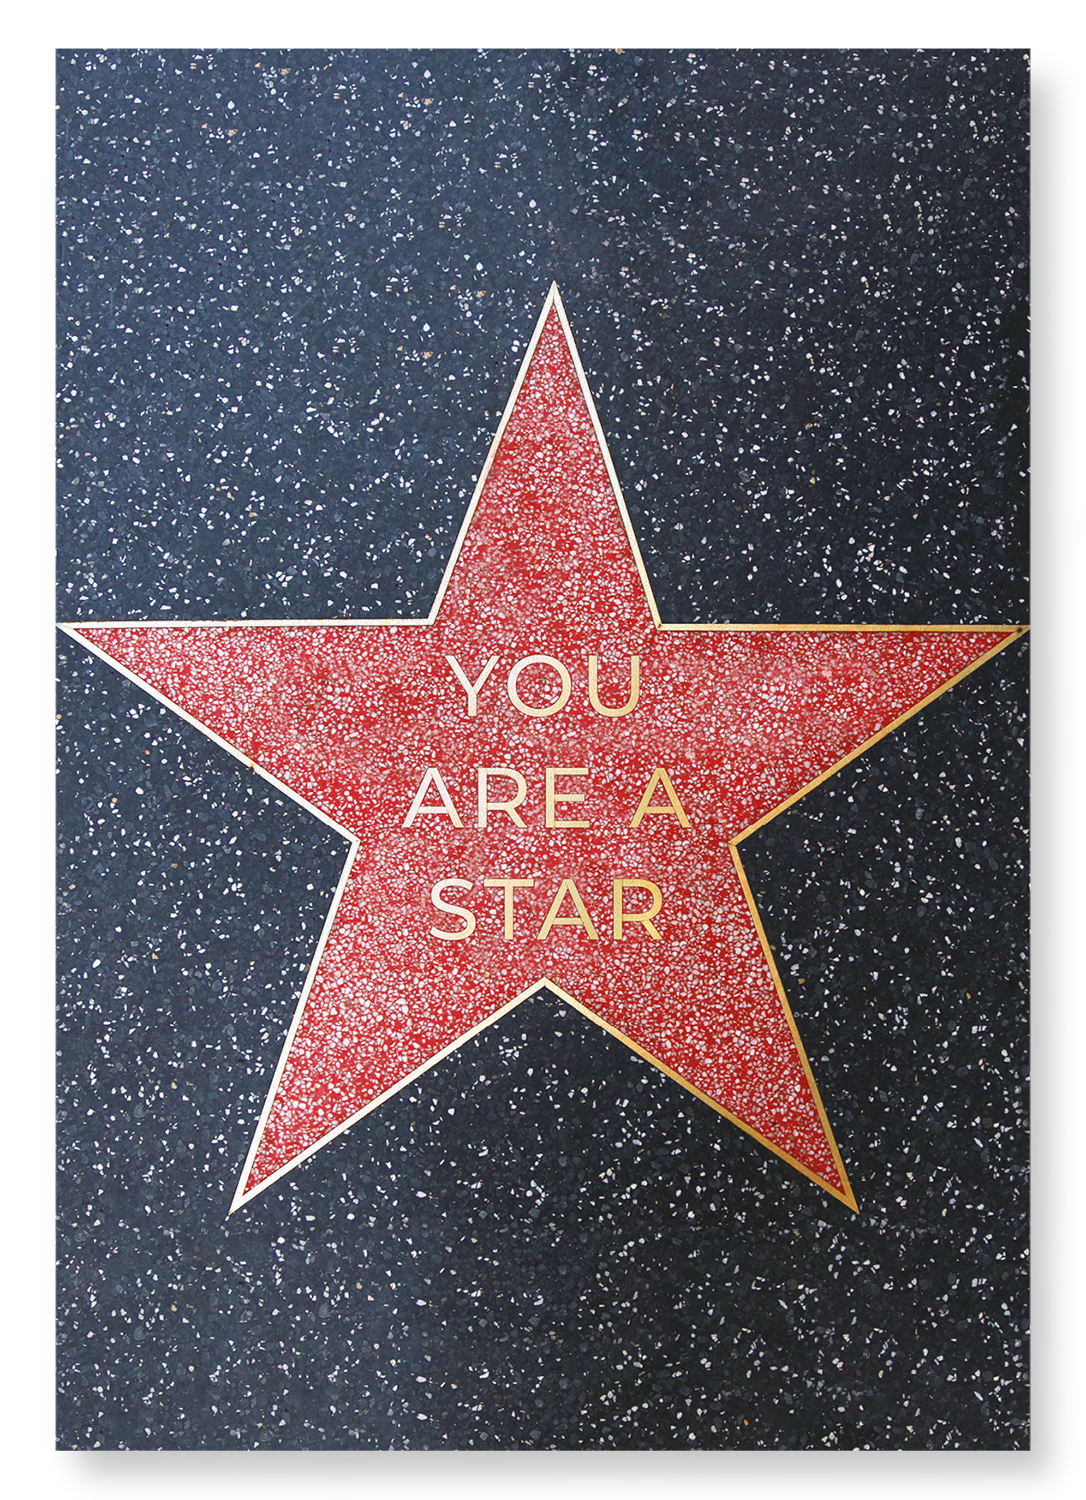 YOU ARE A STAR: Photo Art print